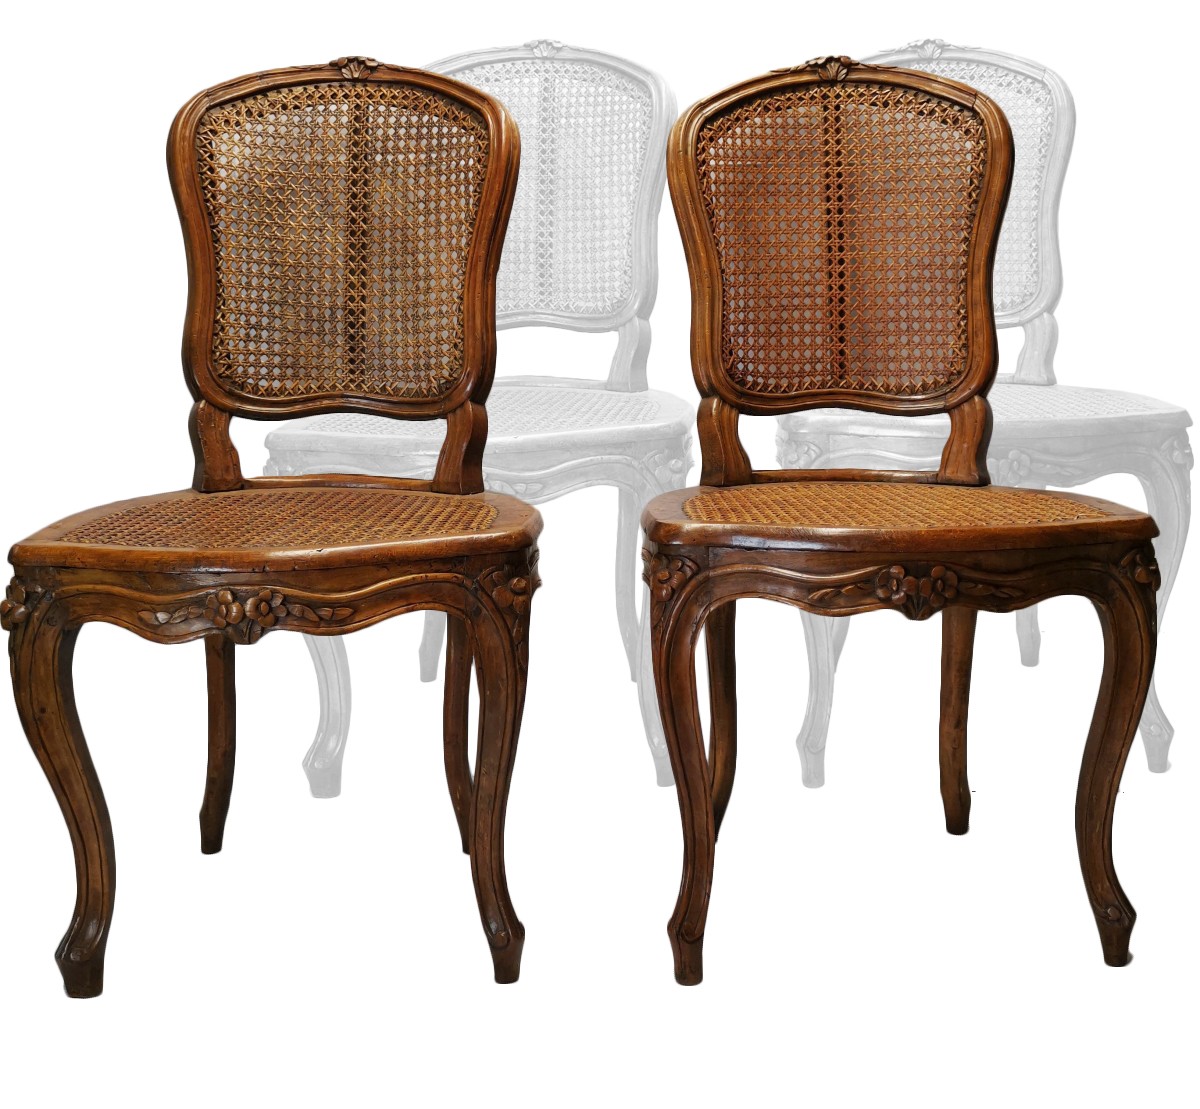 Antique Side Chair with Cane Seating • The Architectural Warehouse